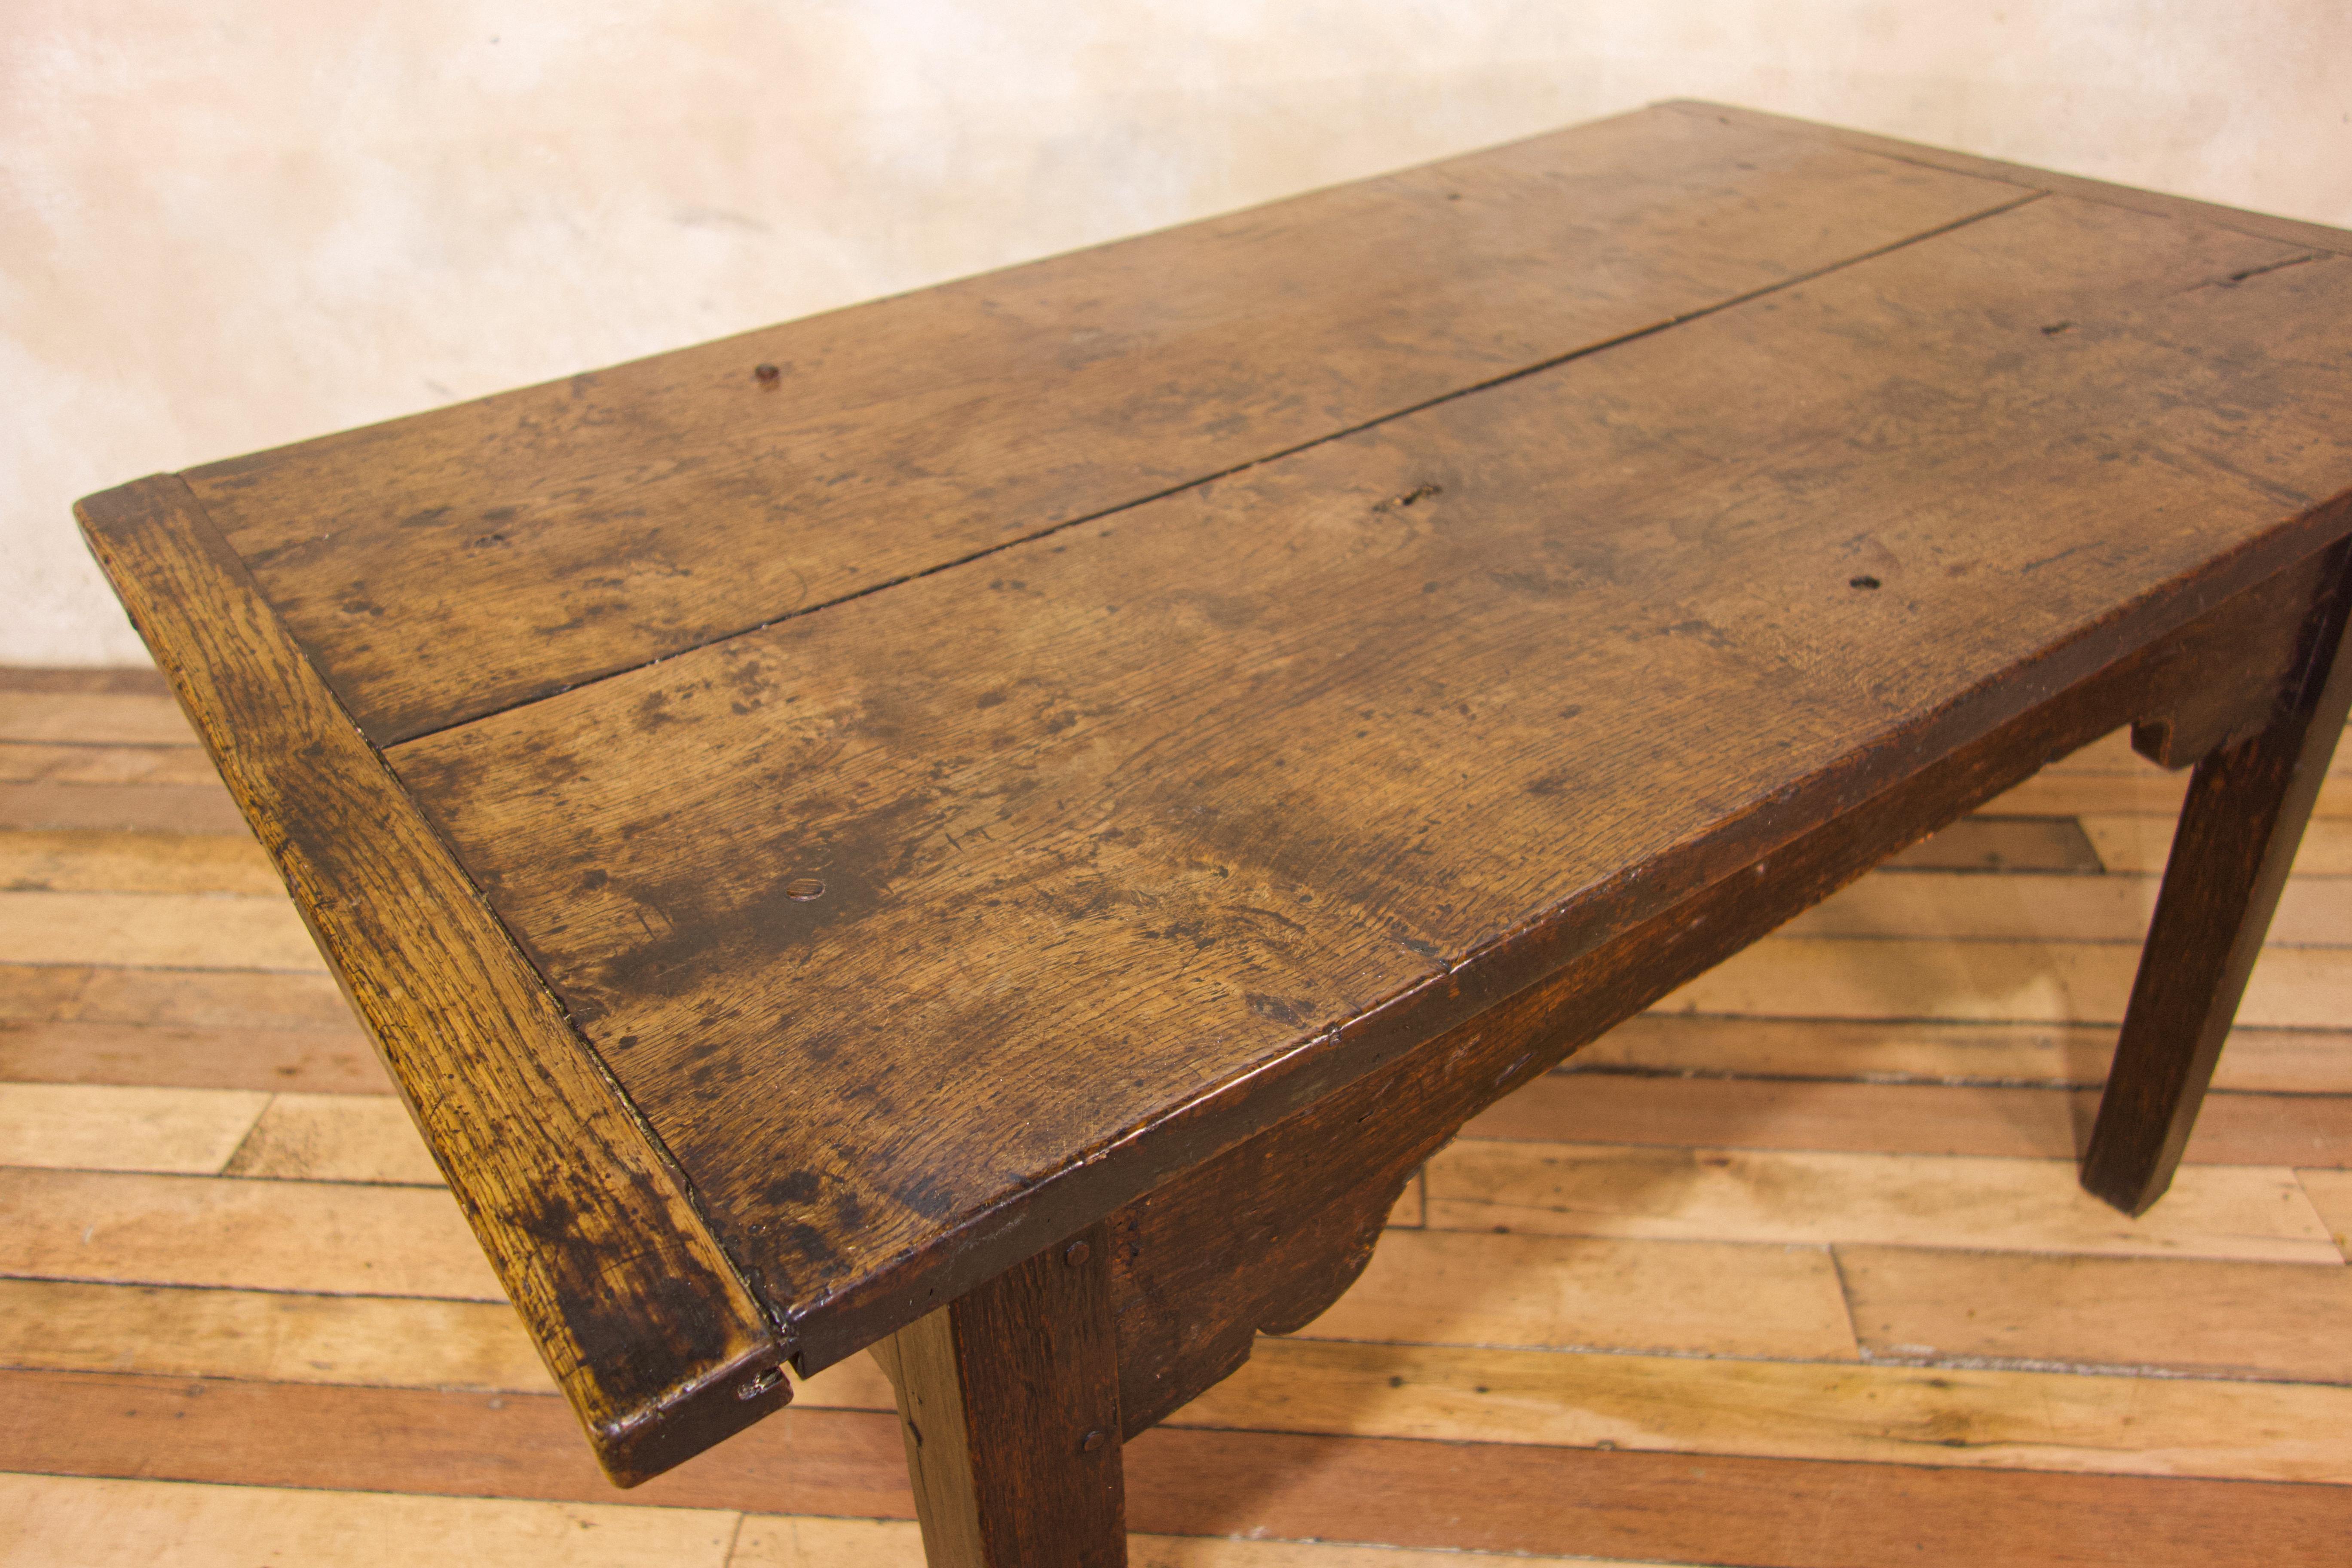 European A Charming Mid 18th Century Joined Oak Country Farmhouse Table For Sale